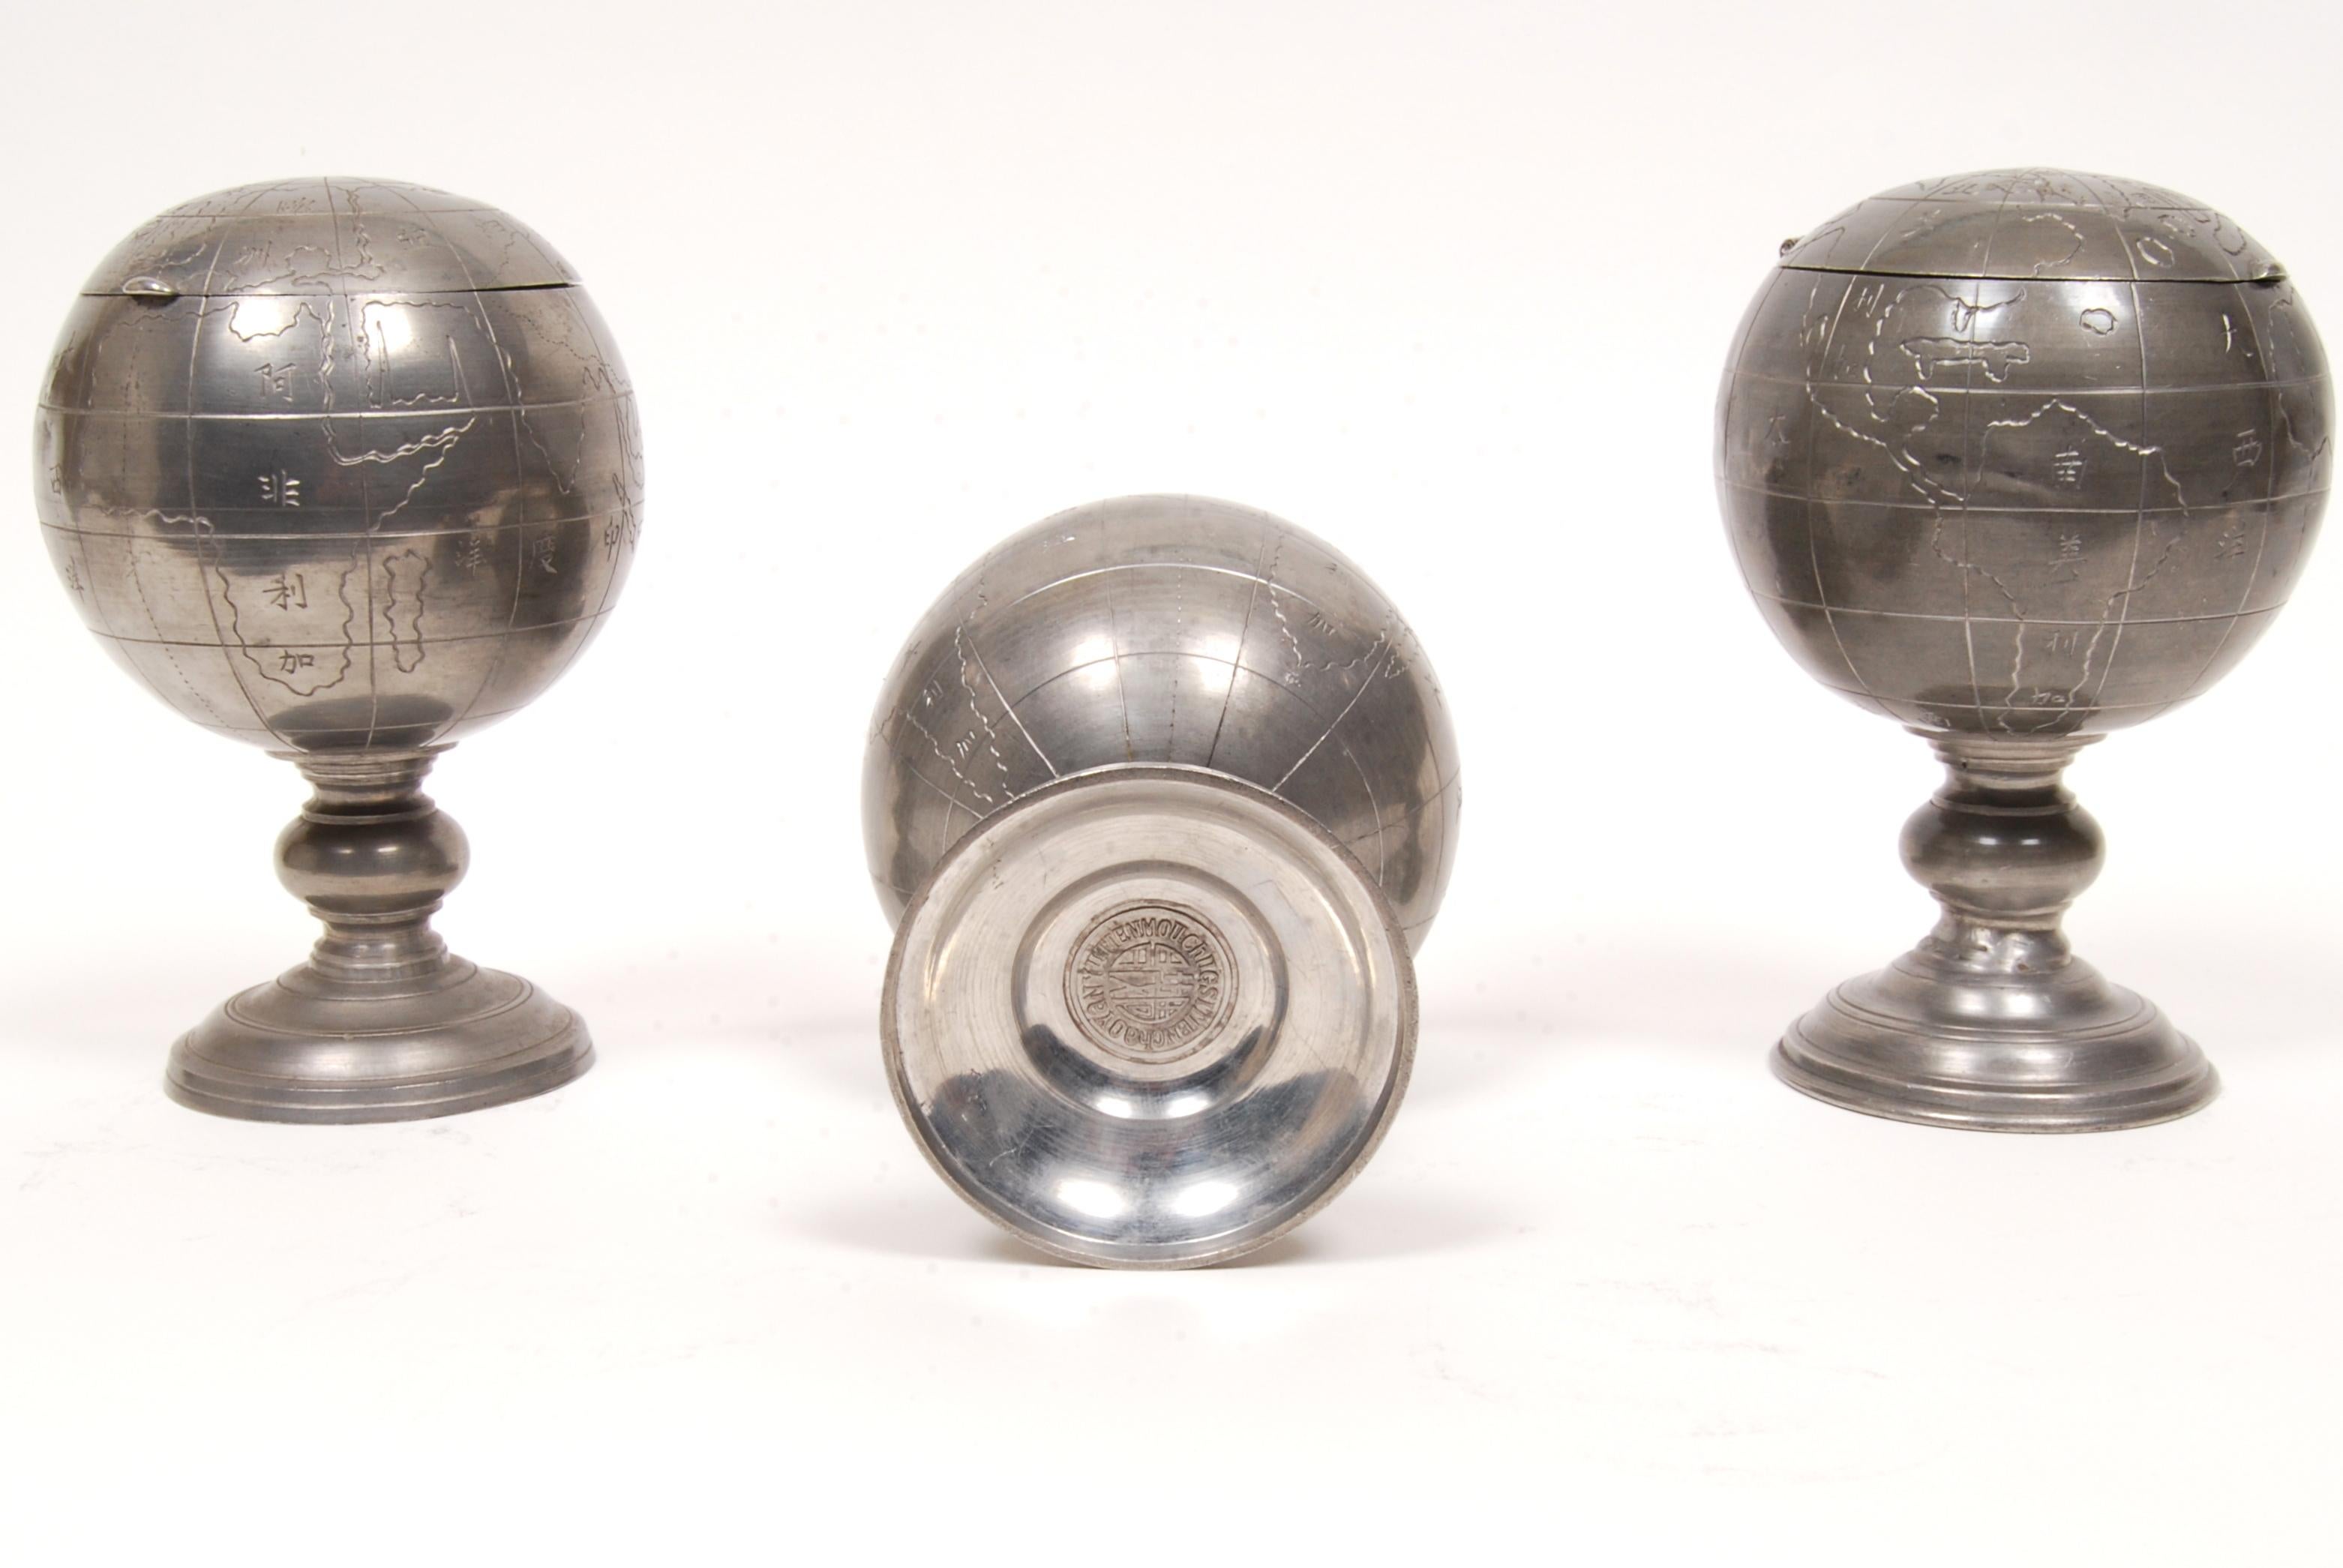 Chinese Export Antique Chinese Pewter Globe Tea Caddies, Set of 3